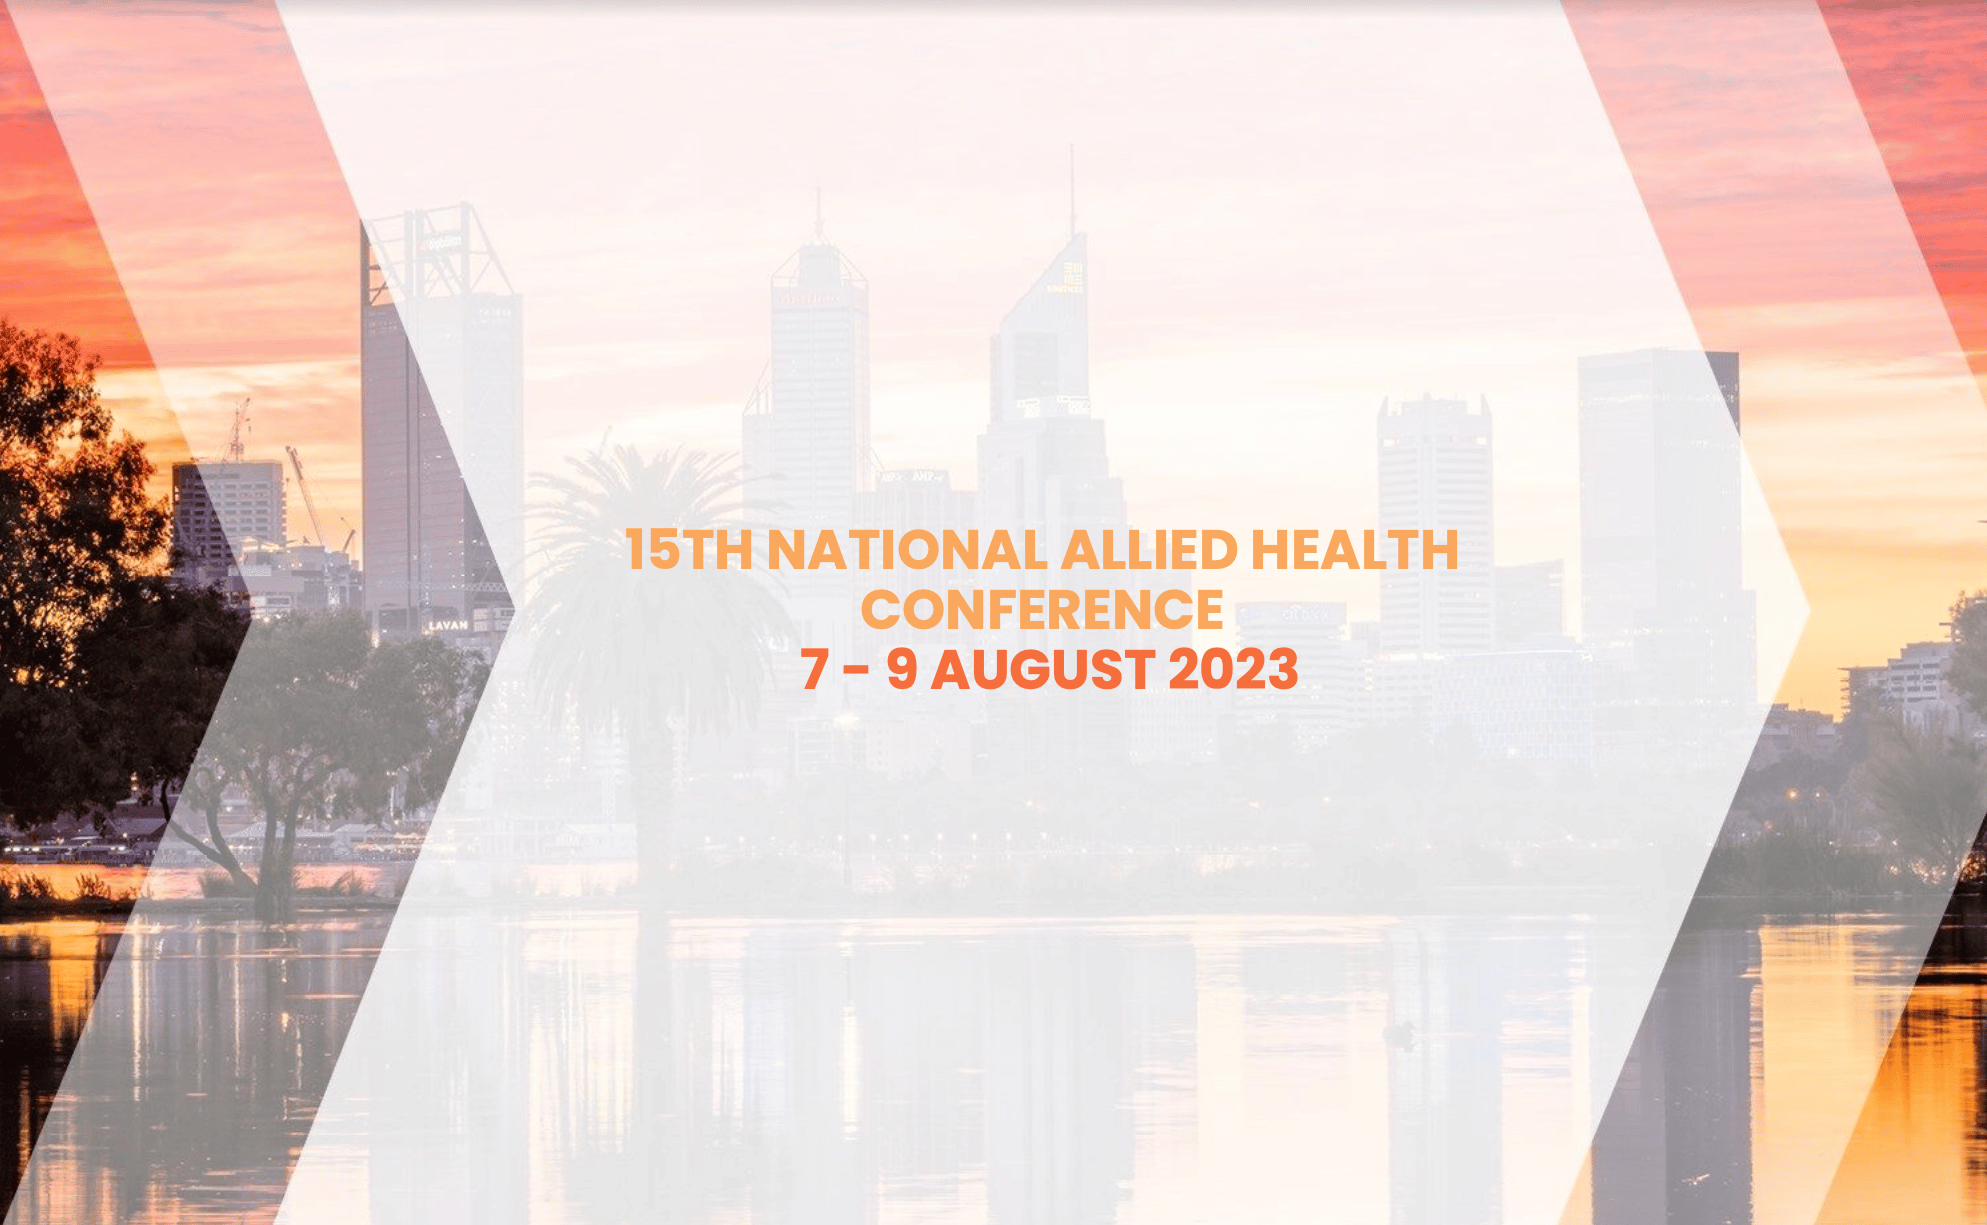 15th National Allied Health Conference